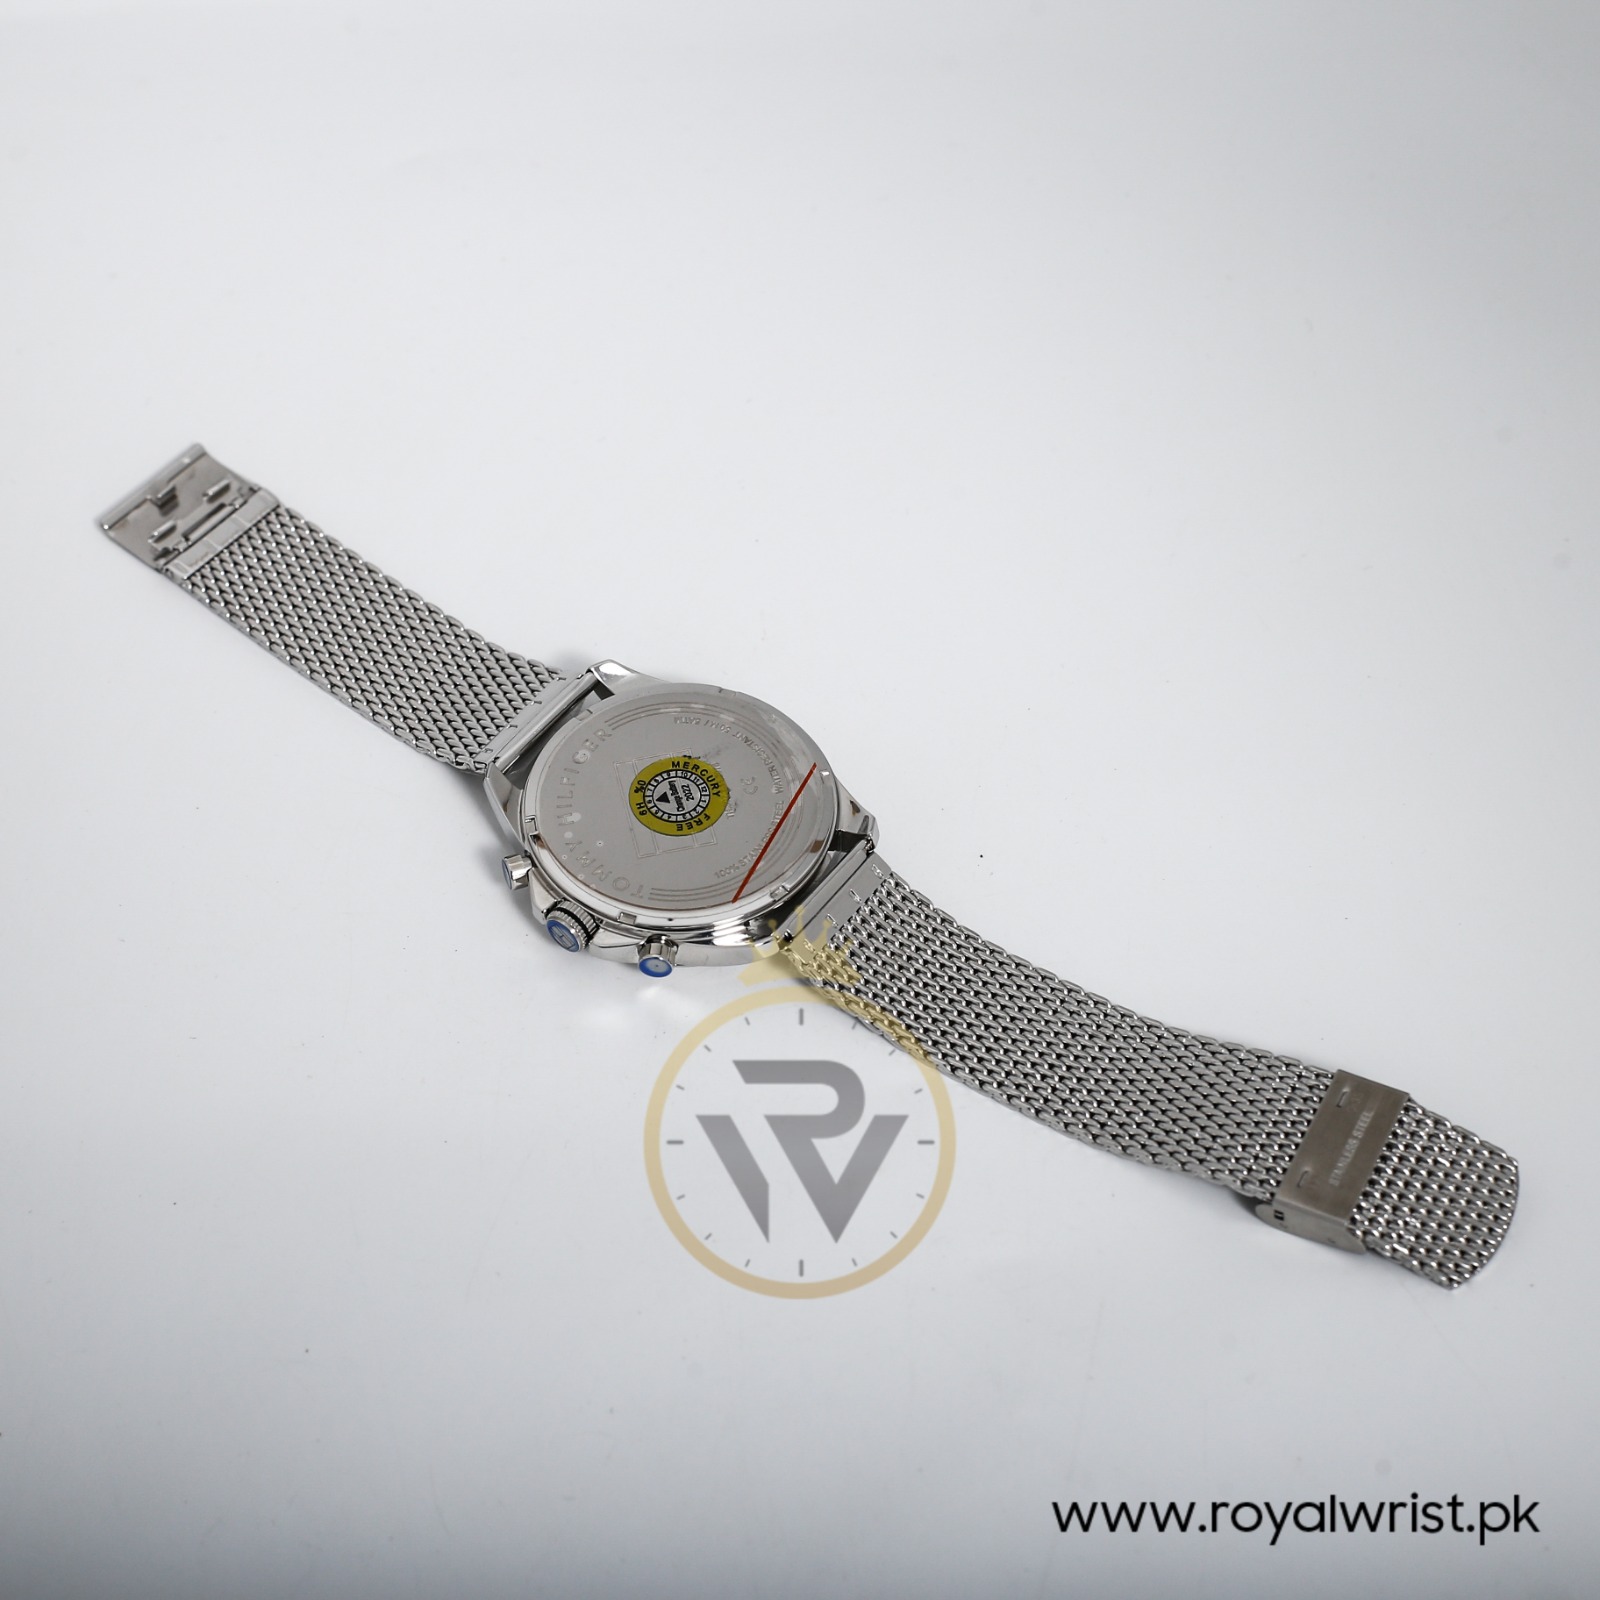 Casual Watch with Stainless Steel Mesh Bracelet | Tommy Hilfiger